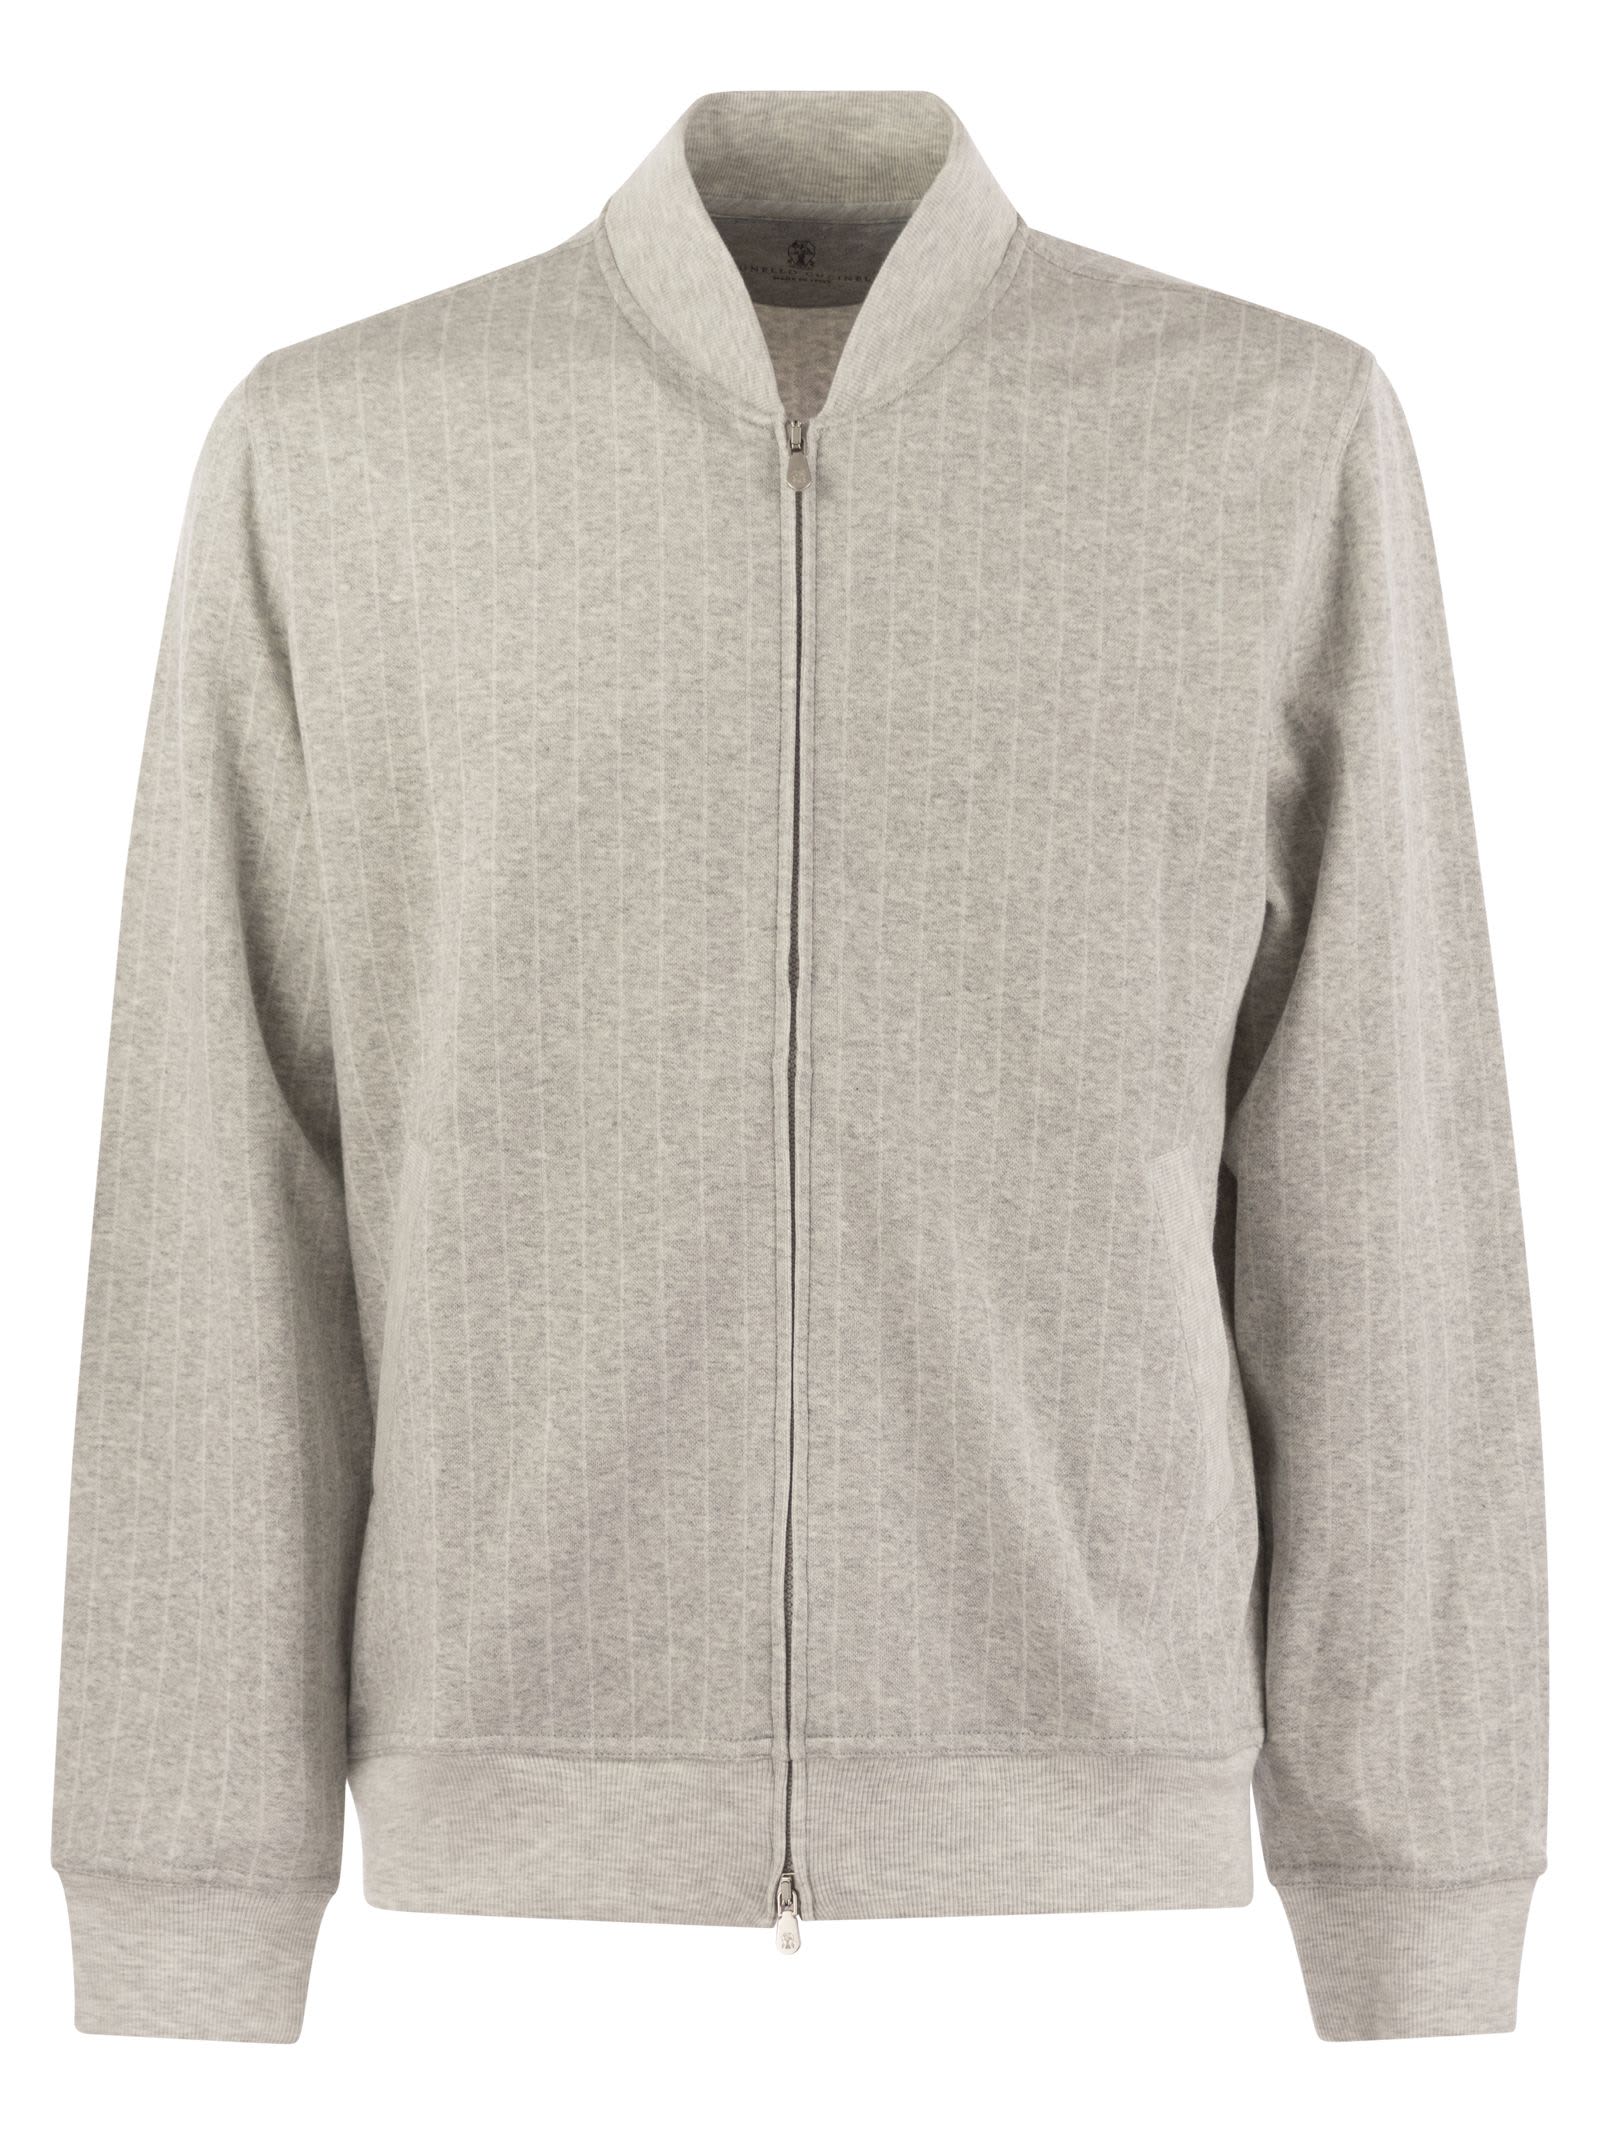 Brunello Cucinelli Double Pinstripe Fleece Topwear In Cotton, Cashmere And Silk With Zip In Pearl